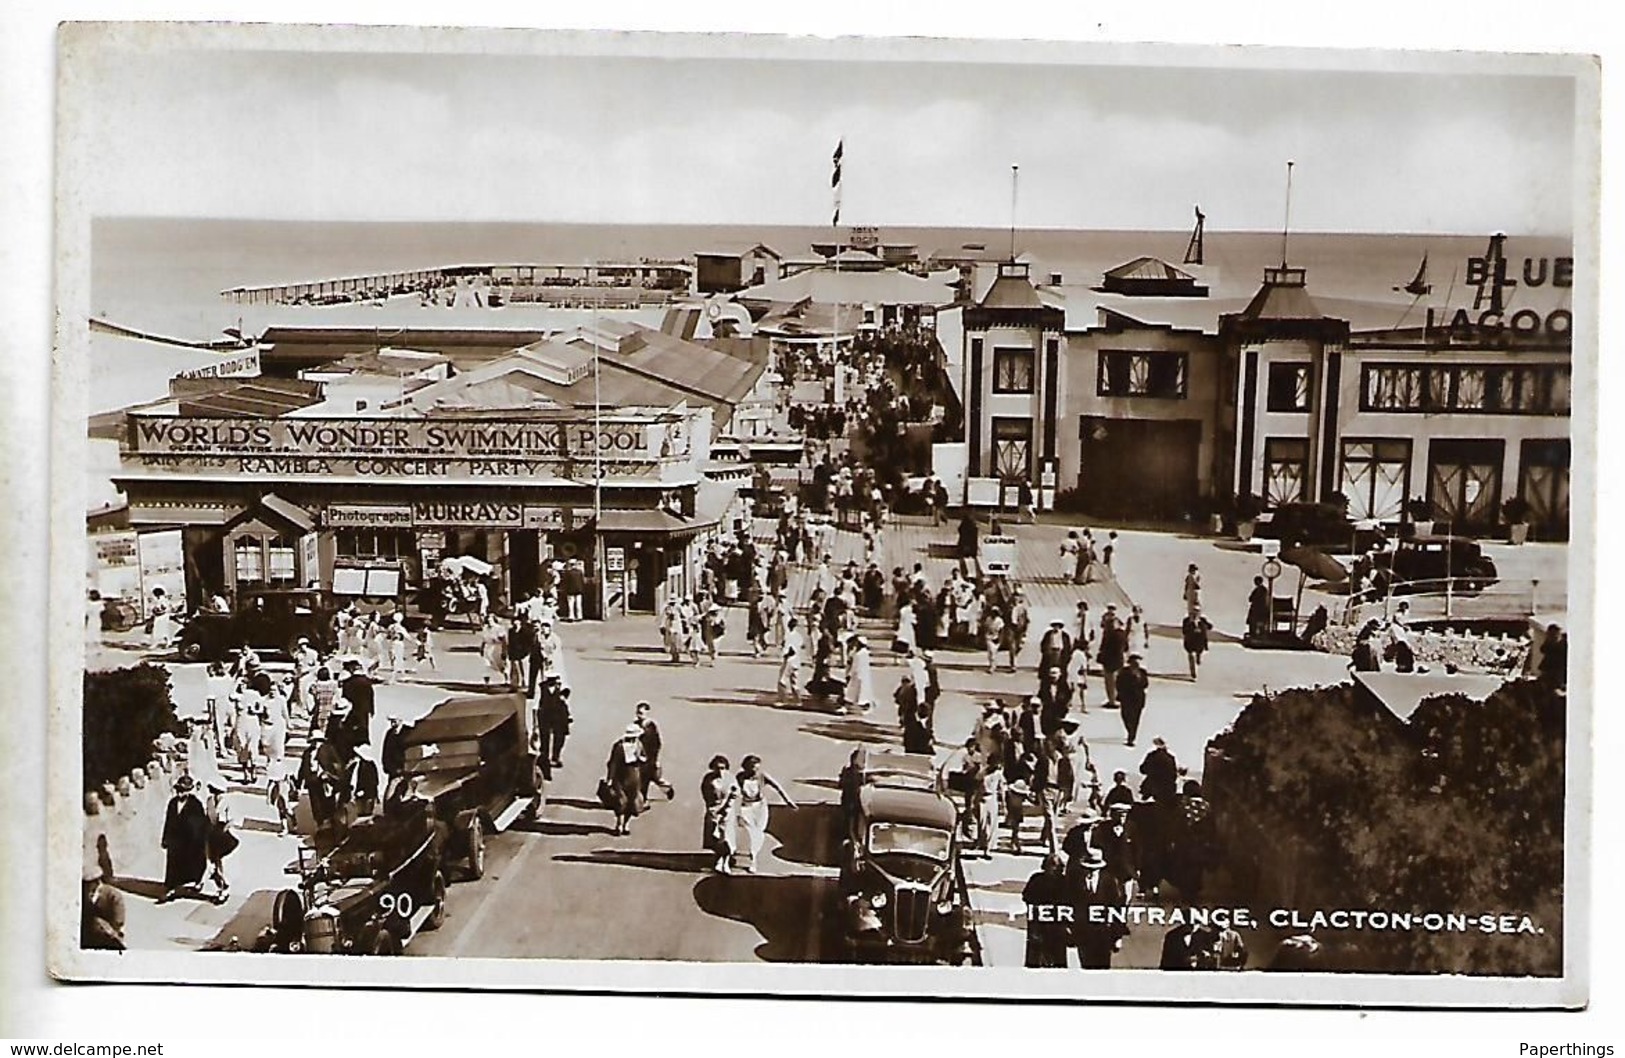 Real Photo Postcard, Clacton-on-sea, Pier Entrance, Animated Crowd Of People, Cars, Automobile. 1936. - Clacton On Sea